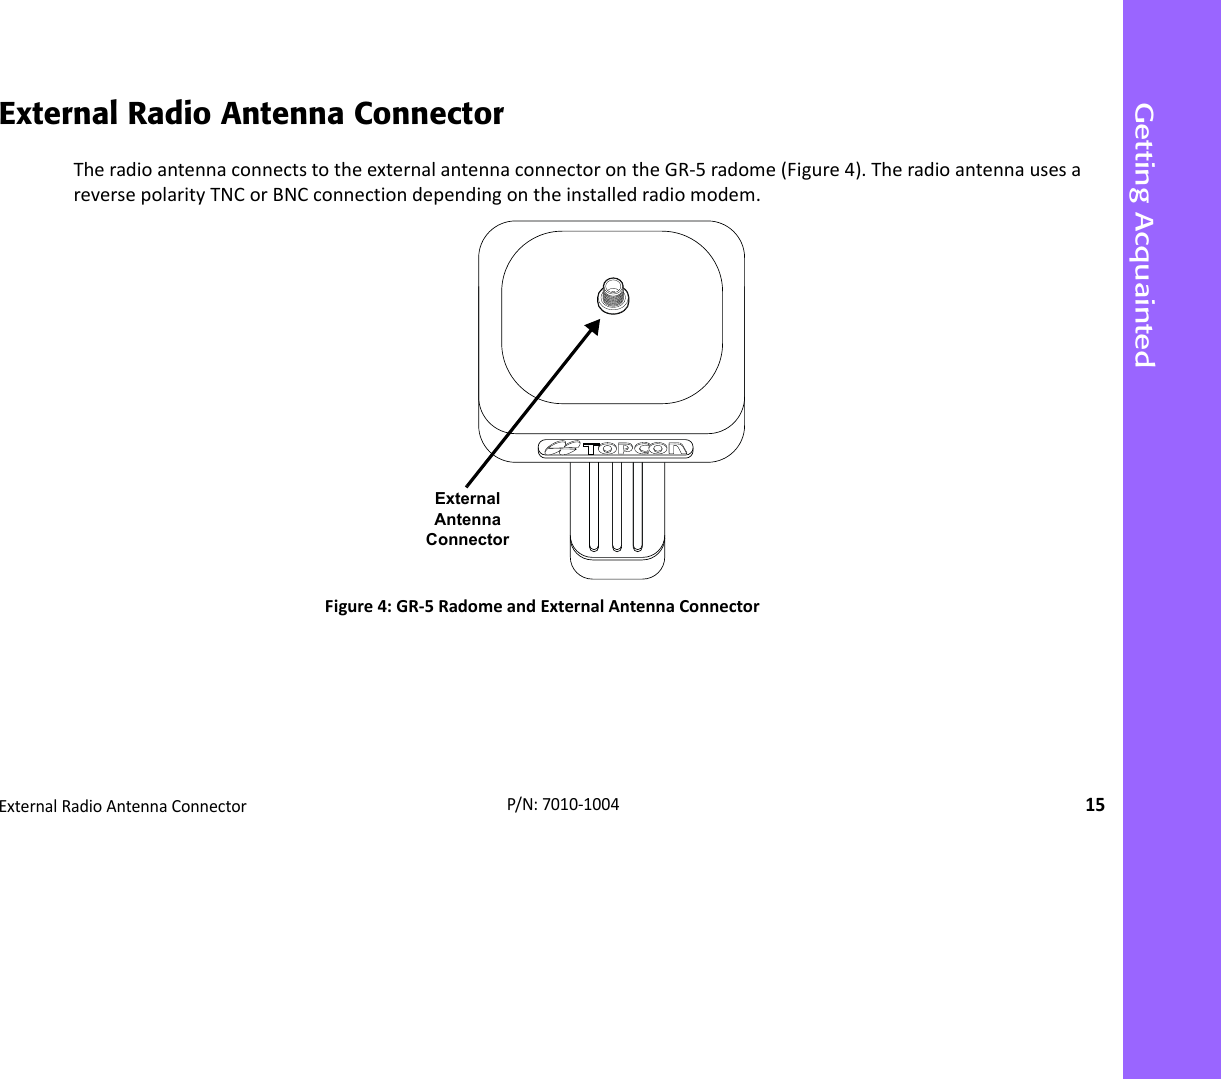 Getting AcquaintedExternalRadioAntennaConnector15P/N:7010‐1004External Radio Antenna ConnectorTheradioantennaconnectstotheexternalantennaconnectorontheGR‐5radome(Figure4).TheradioantennausesareversepolarityTNCorBNCconnectiondependingontheinstalledradiomodem.Figure4:GR‐5RadomeandExternalAntennaConnectorExternal Antenna Connector